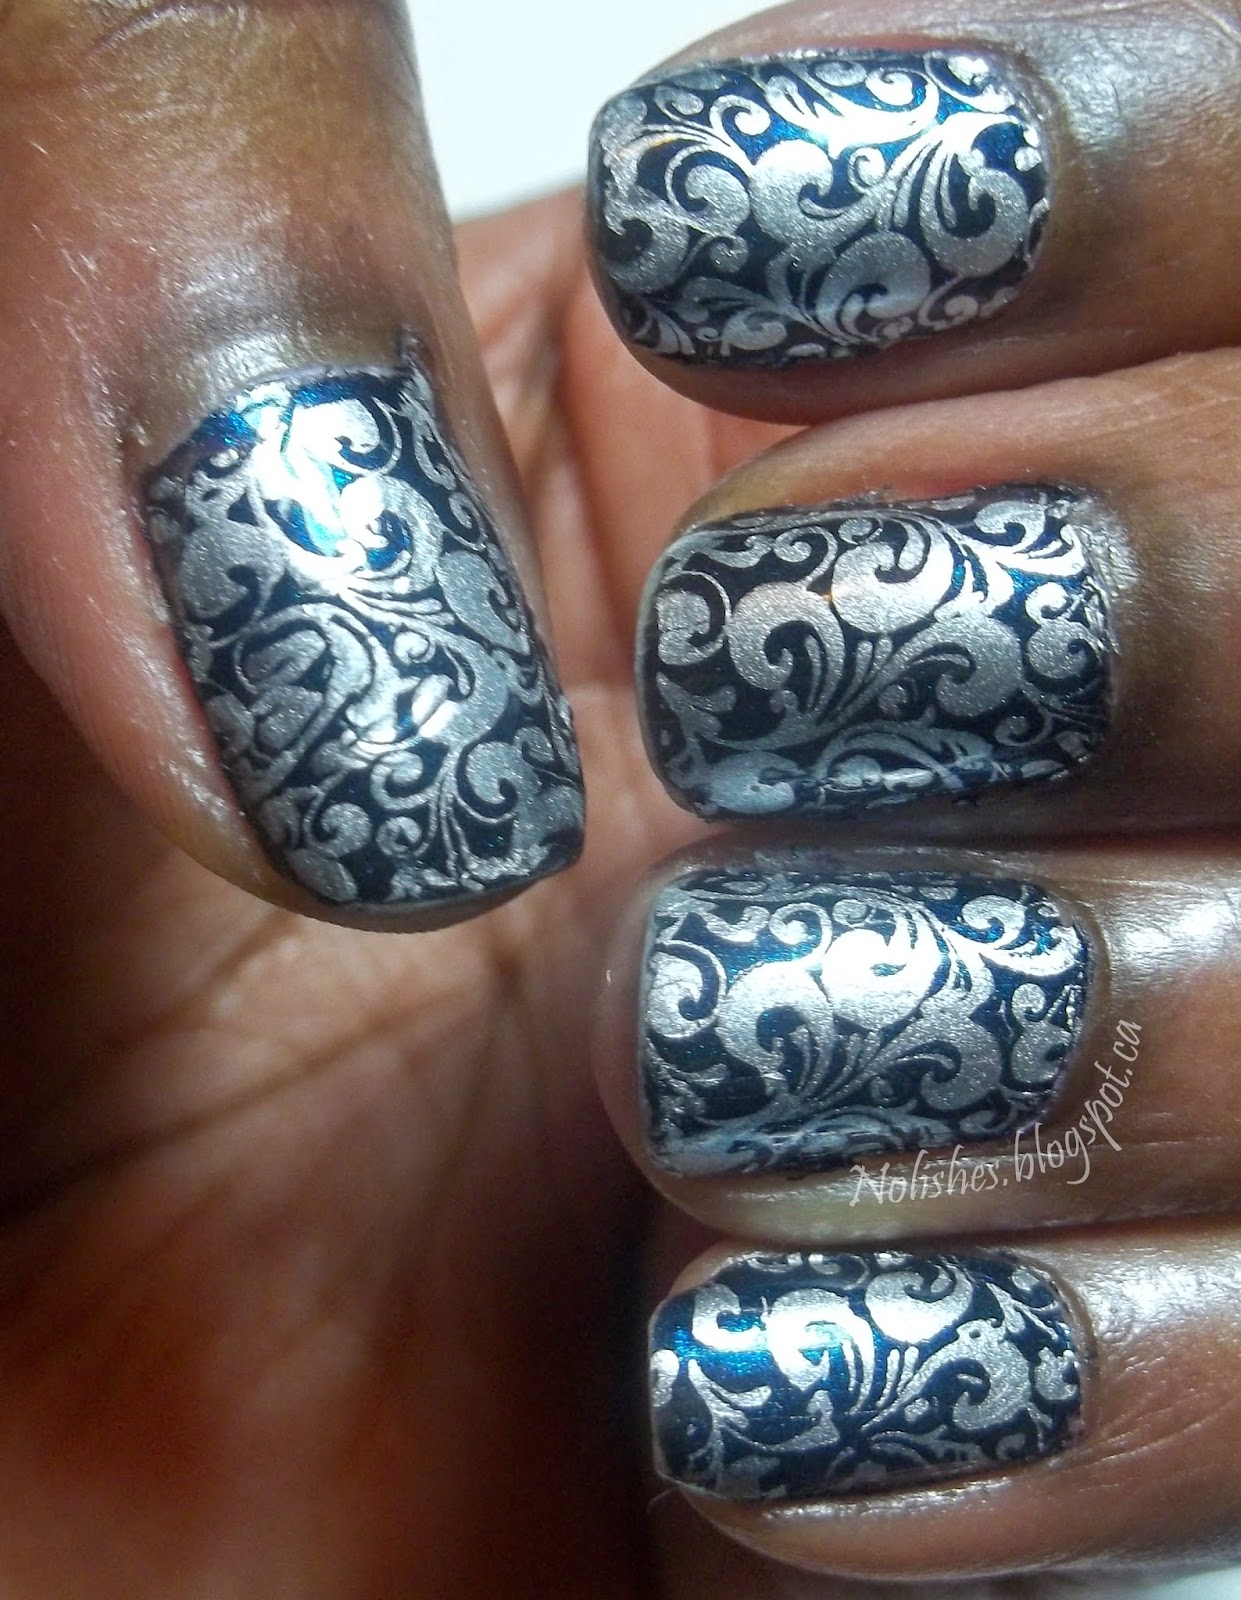 A basic nail stamping manicure created with a dark teal base polish stamped with a dense filigree pattern in silver.